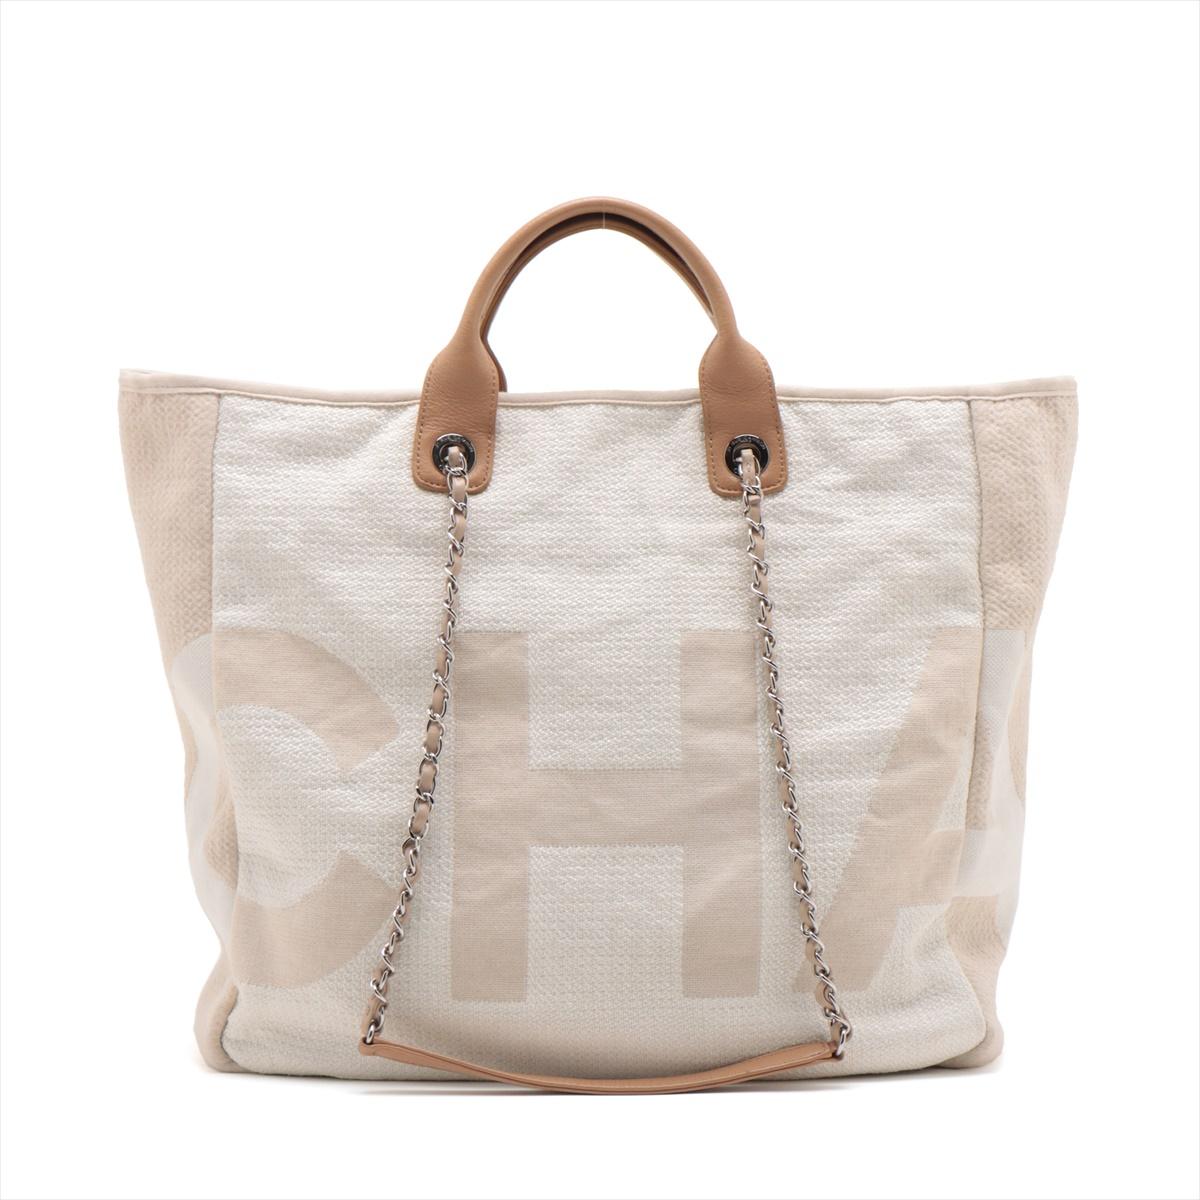 The Chanel Canvas Deauville Tote Bag in Light Beige is a chic and versatile accessory that effortlessly blends casual elegance with the iconic Chanel aesthetic. Crafted from durable canvas, the tote features oversized Chanel lettering all over the